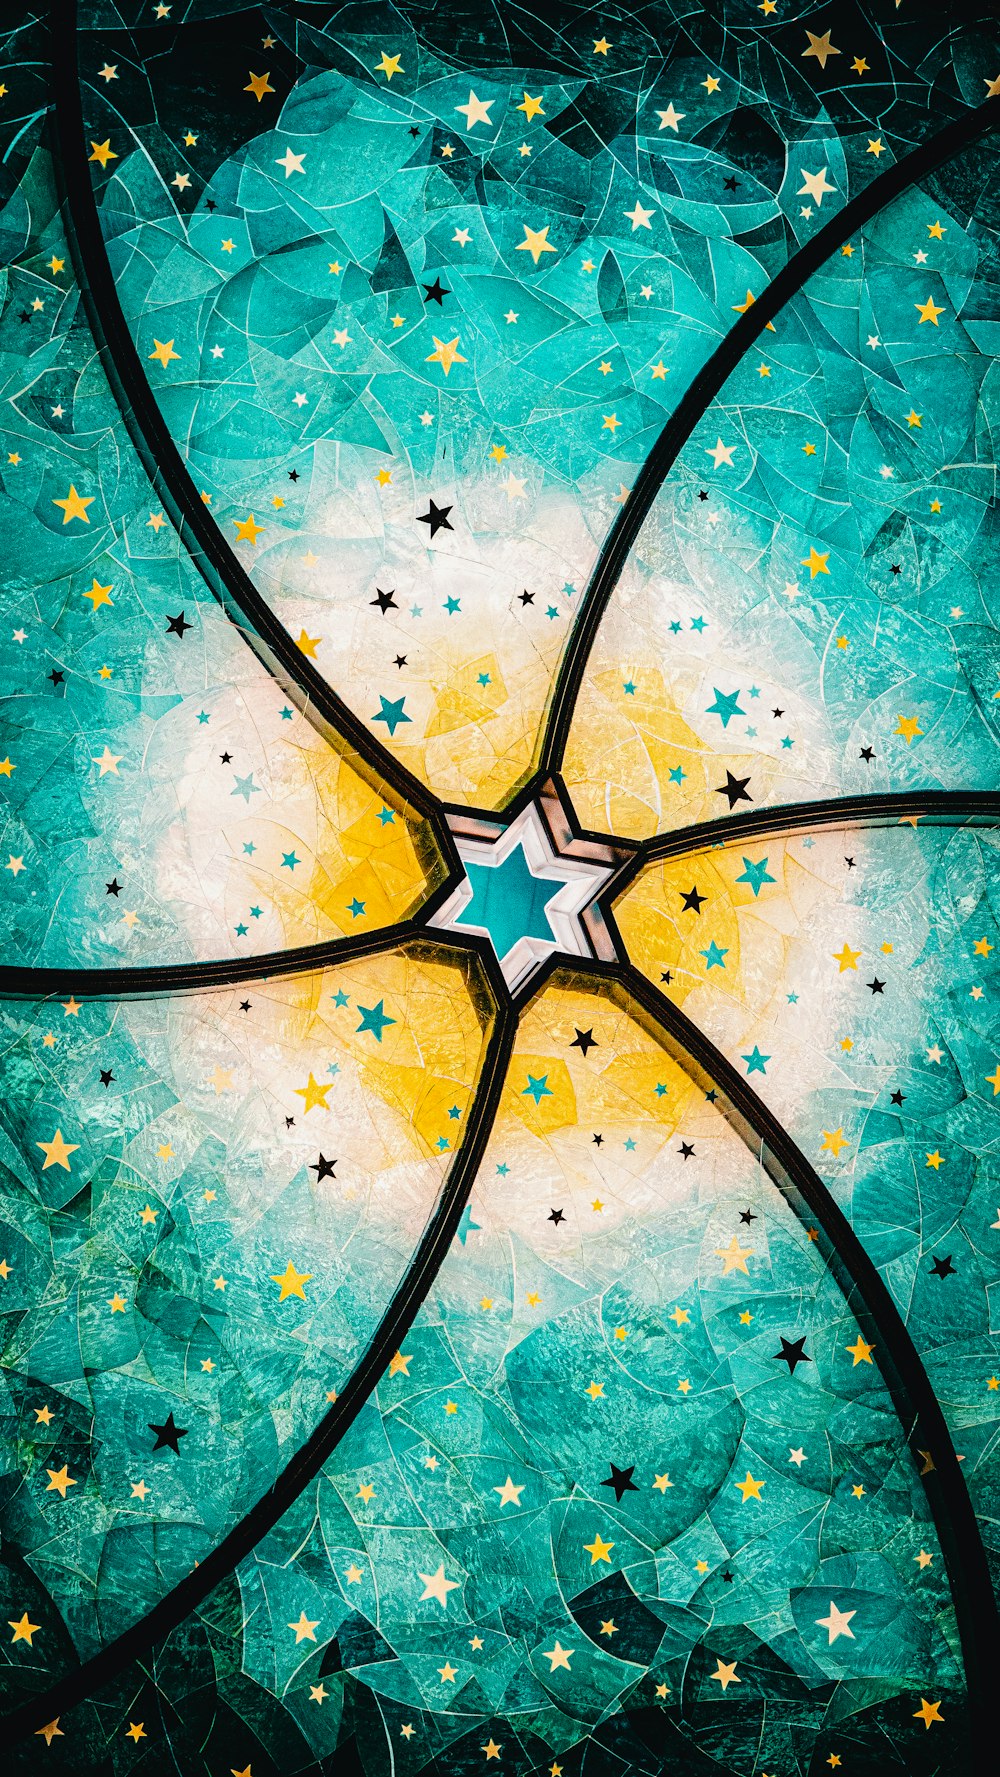 a painting of stars on a blue background